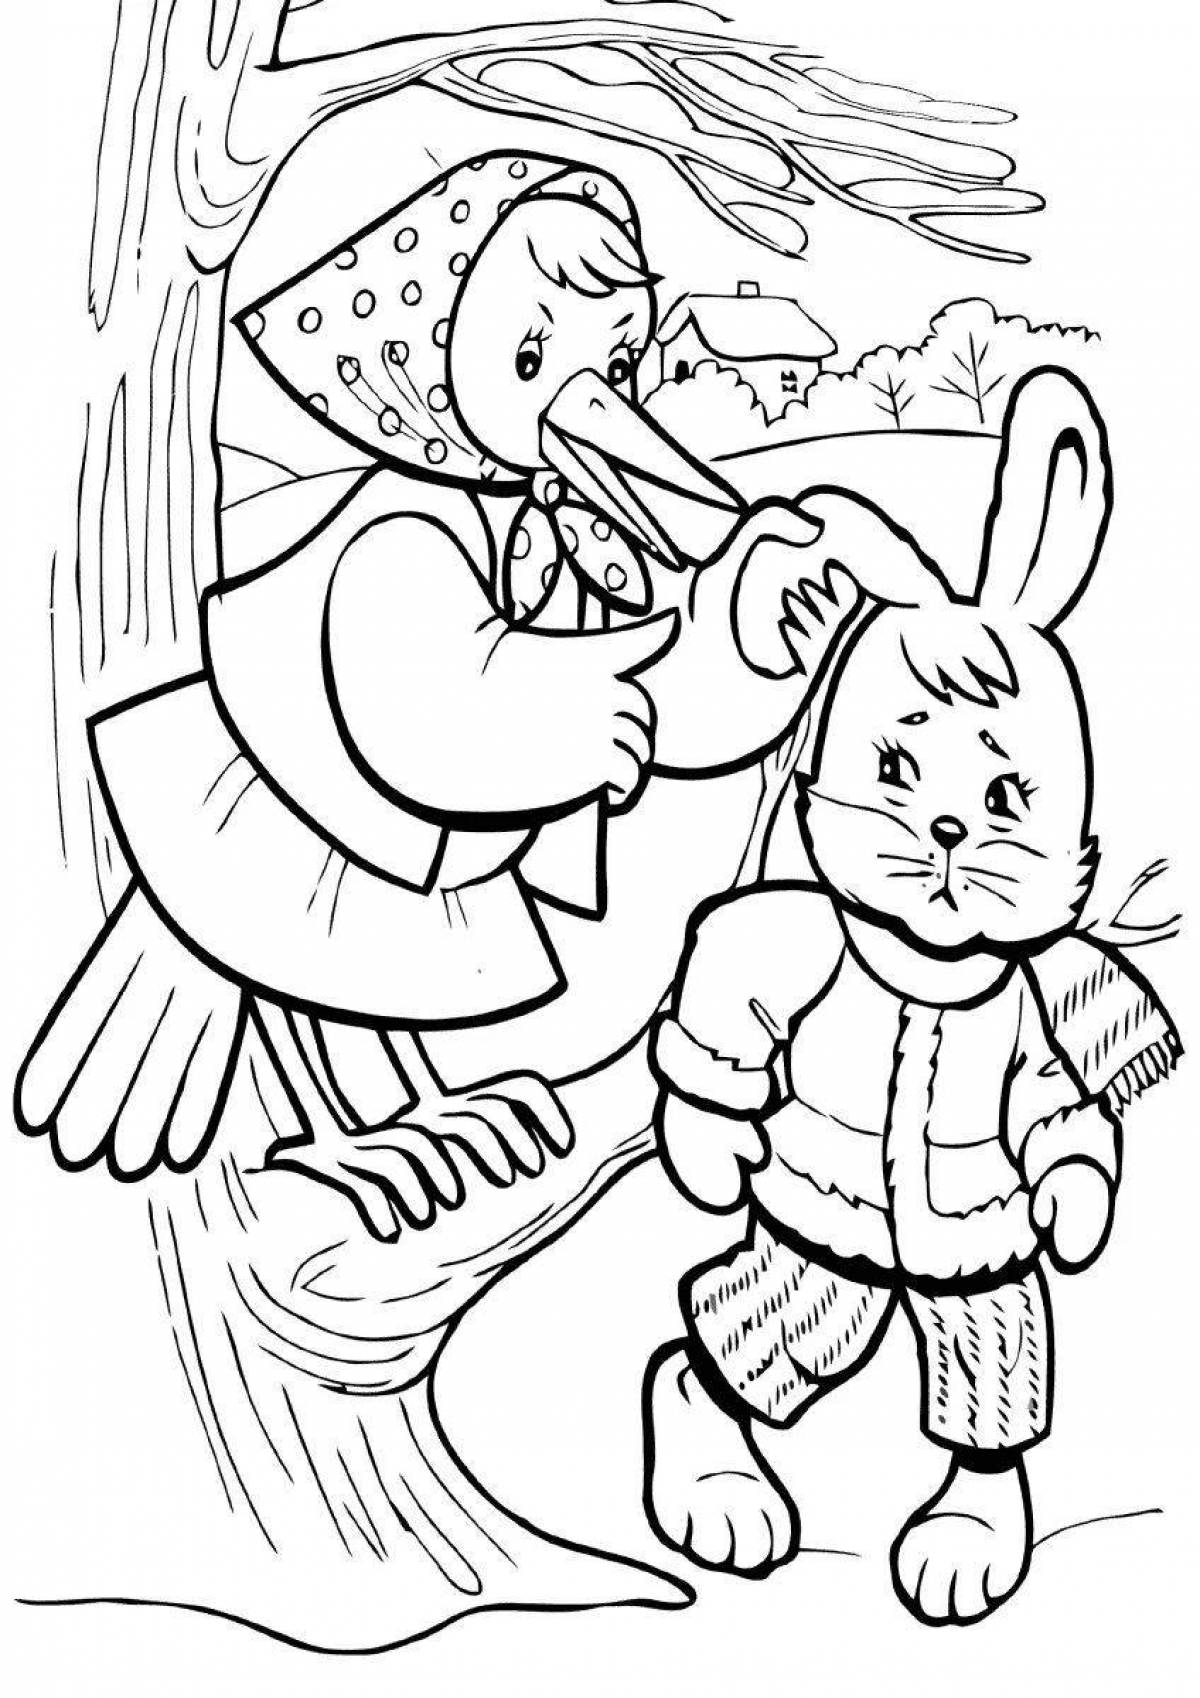 Playful coloring book based on Russian folk tales